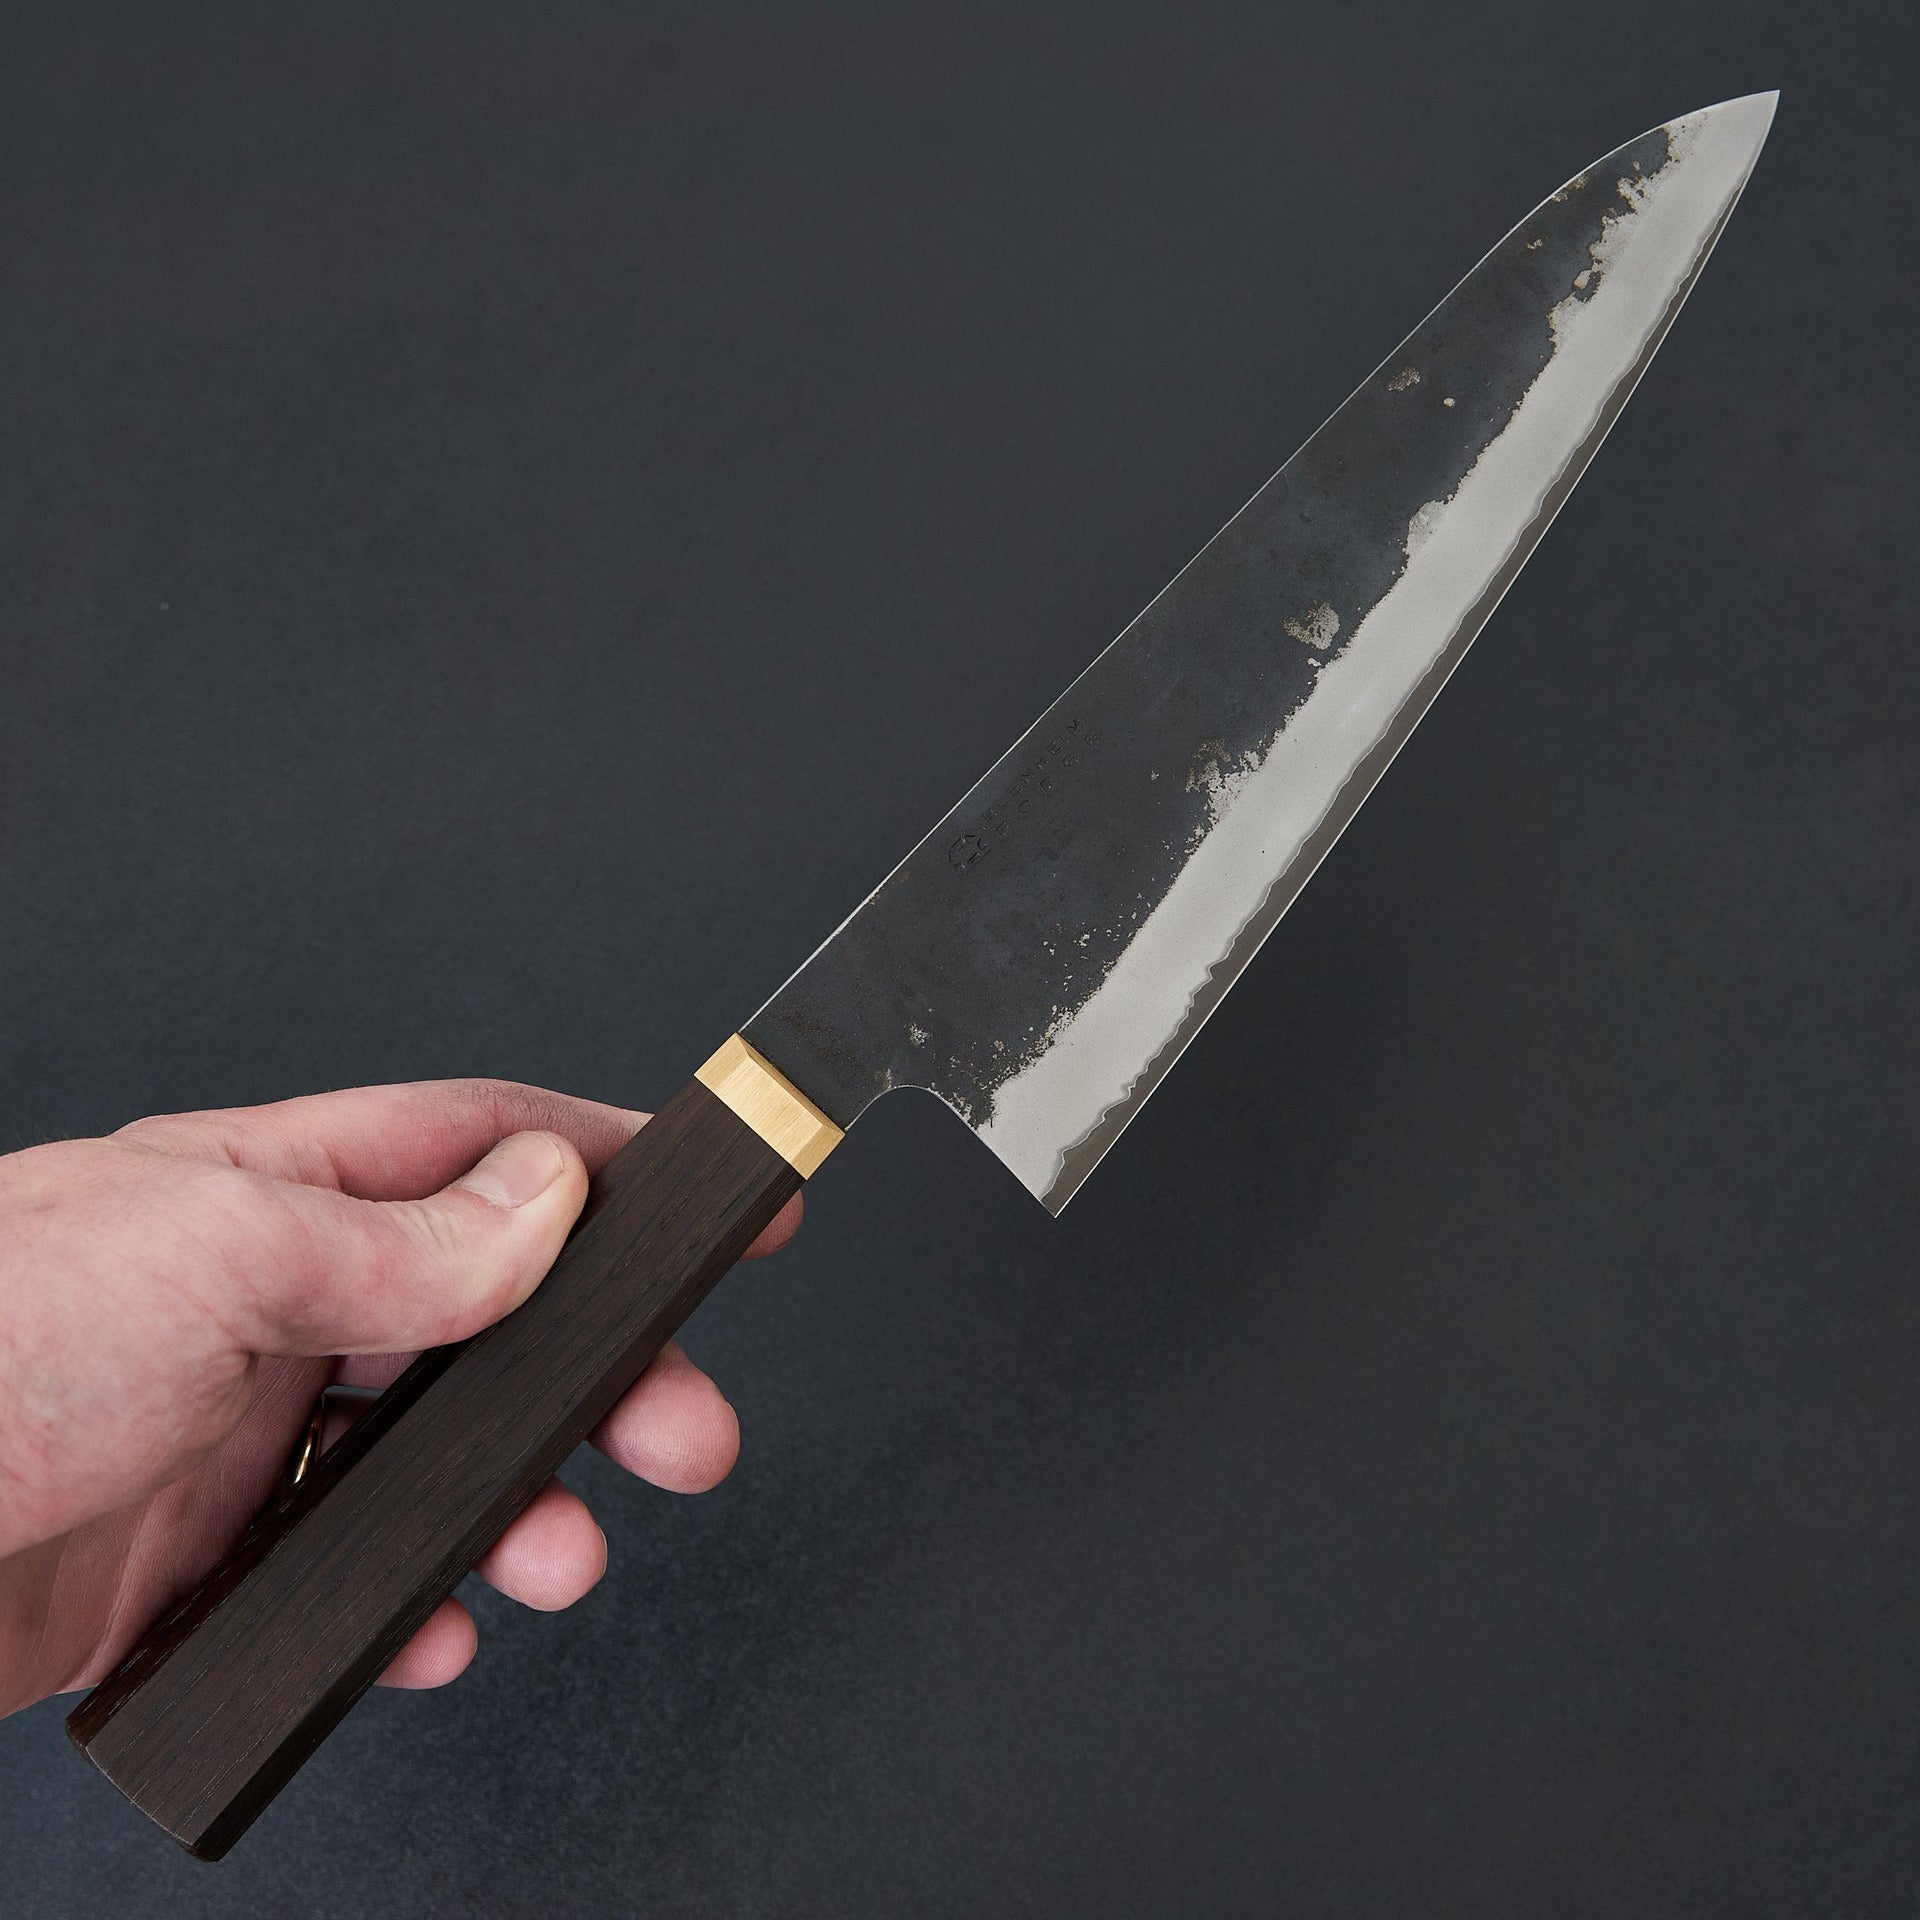 Blenheim Forge Stainless Clad Gyuto 205mm-Knife-Blenheim Forge-Carbon Knife Co